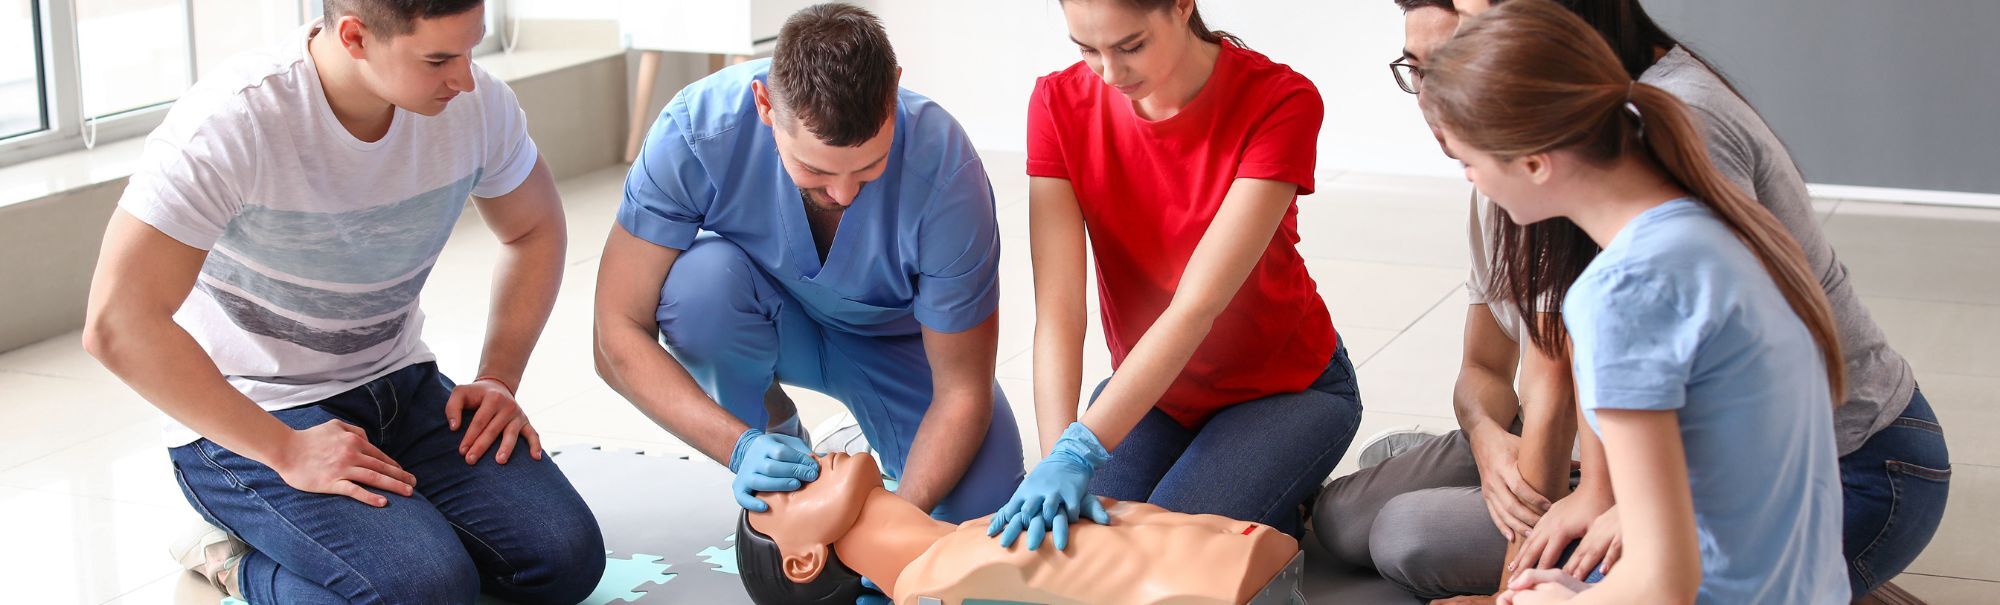 Red Cross Standard First Aid/CPR Level C AED